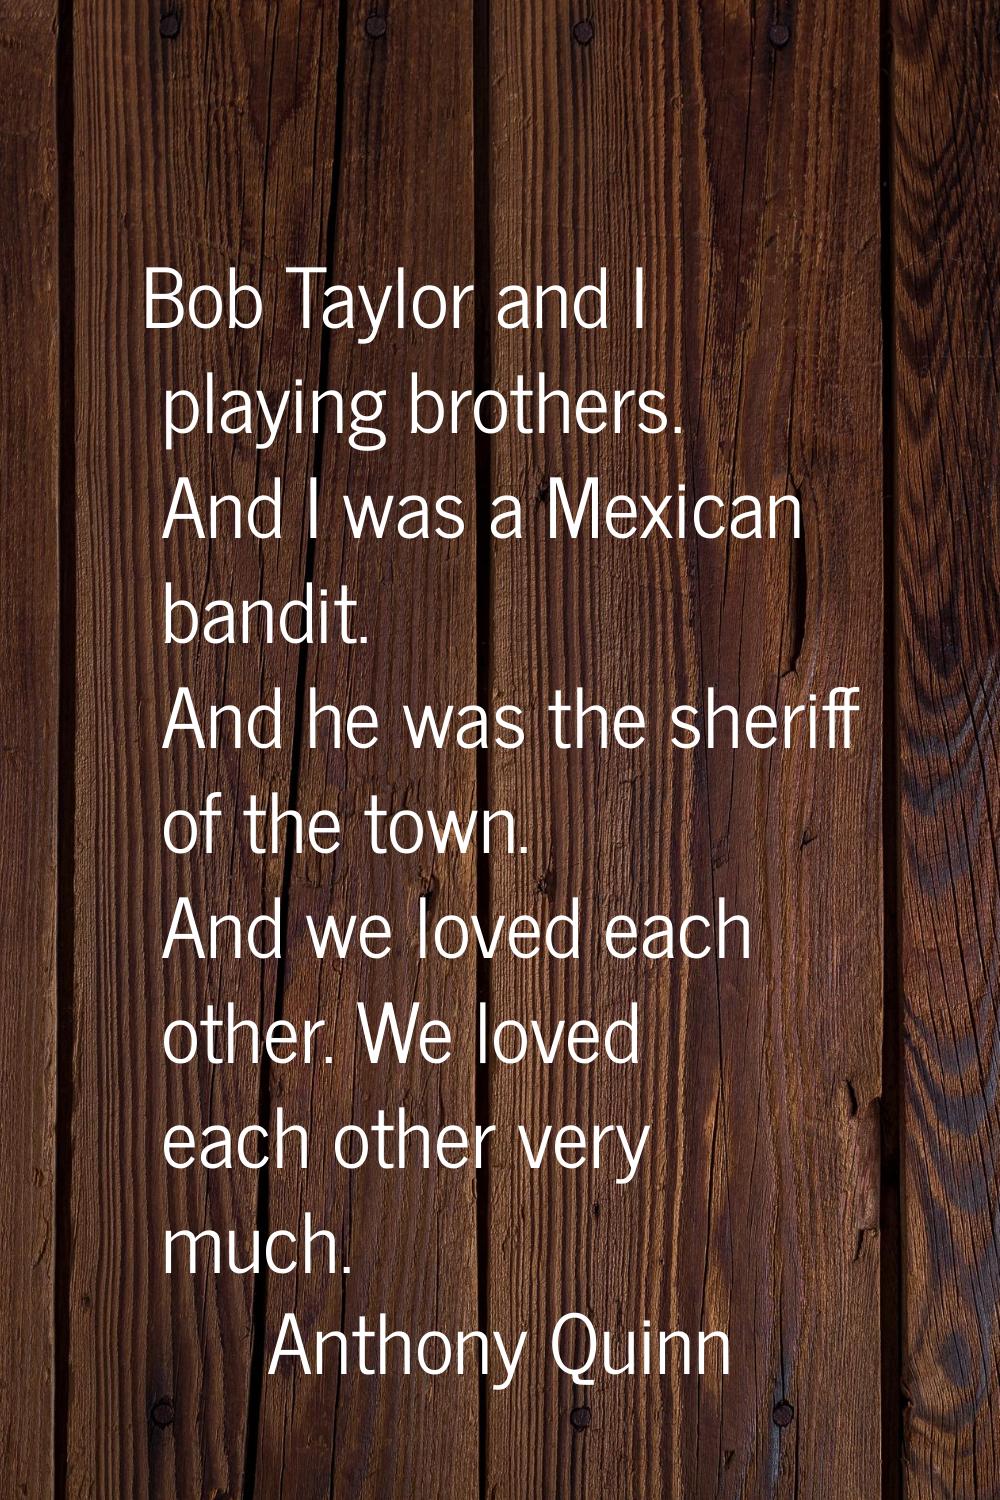 Bob Taylor and I playing brothers. And I was a Mexican bandit. And he was the sheriff of the town. 